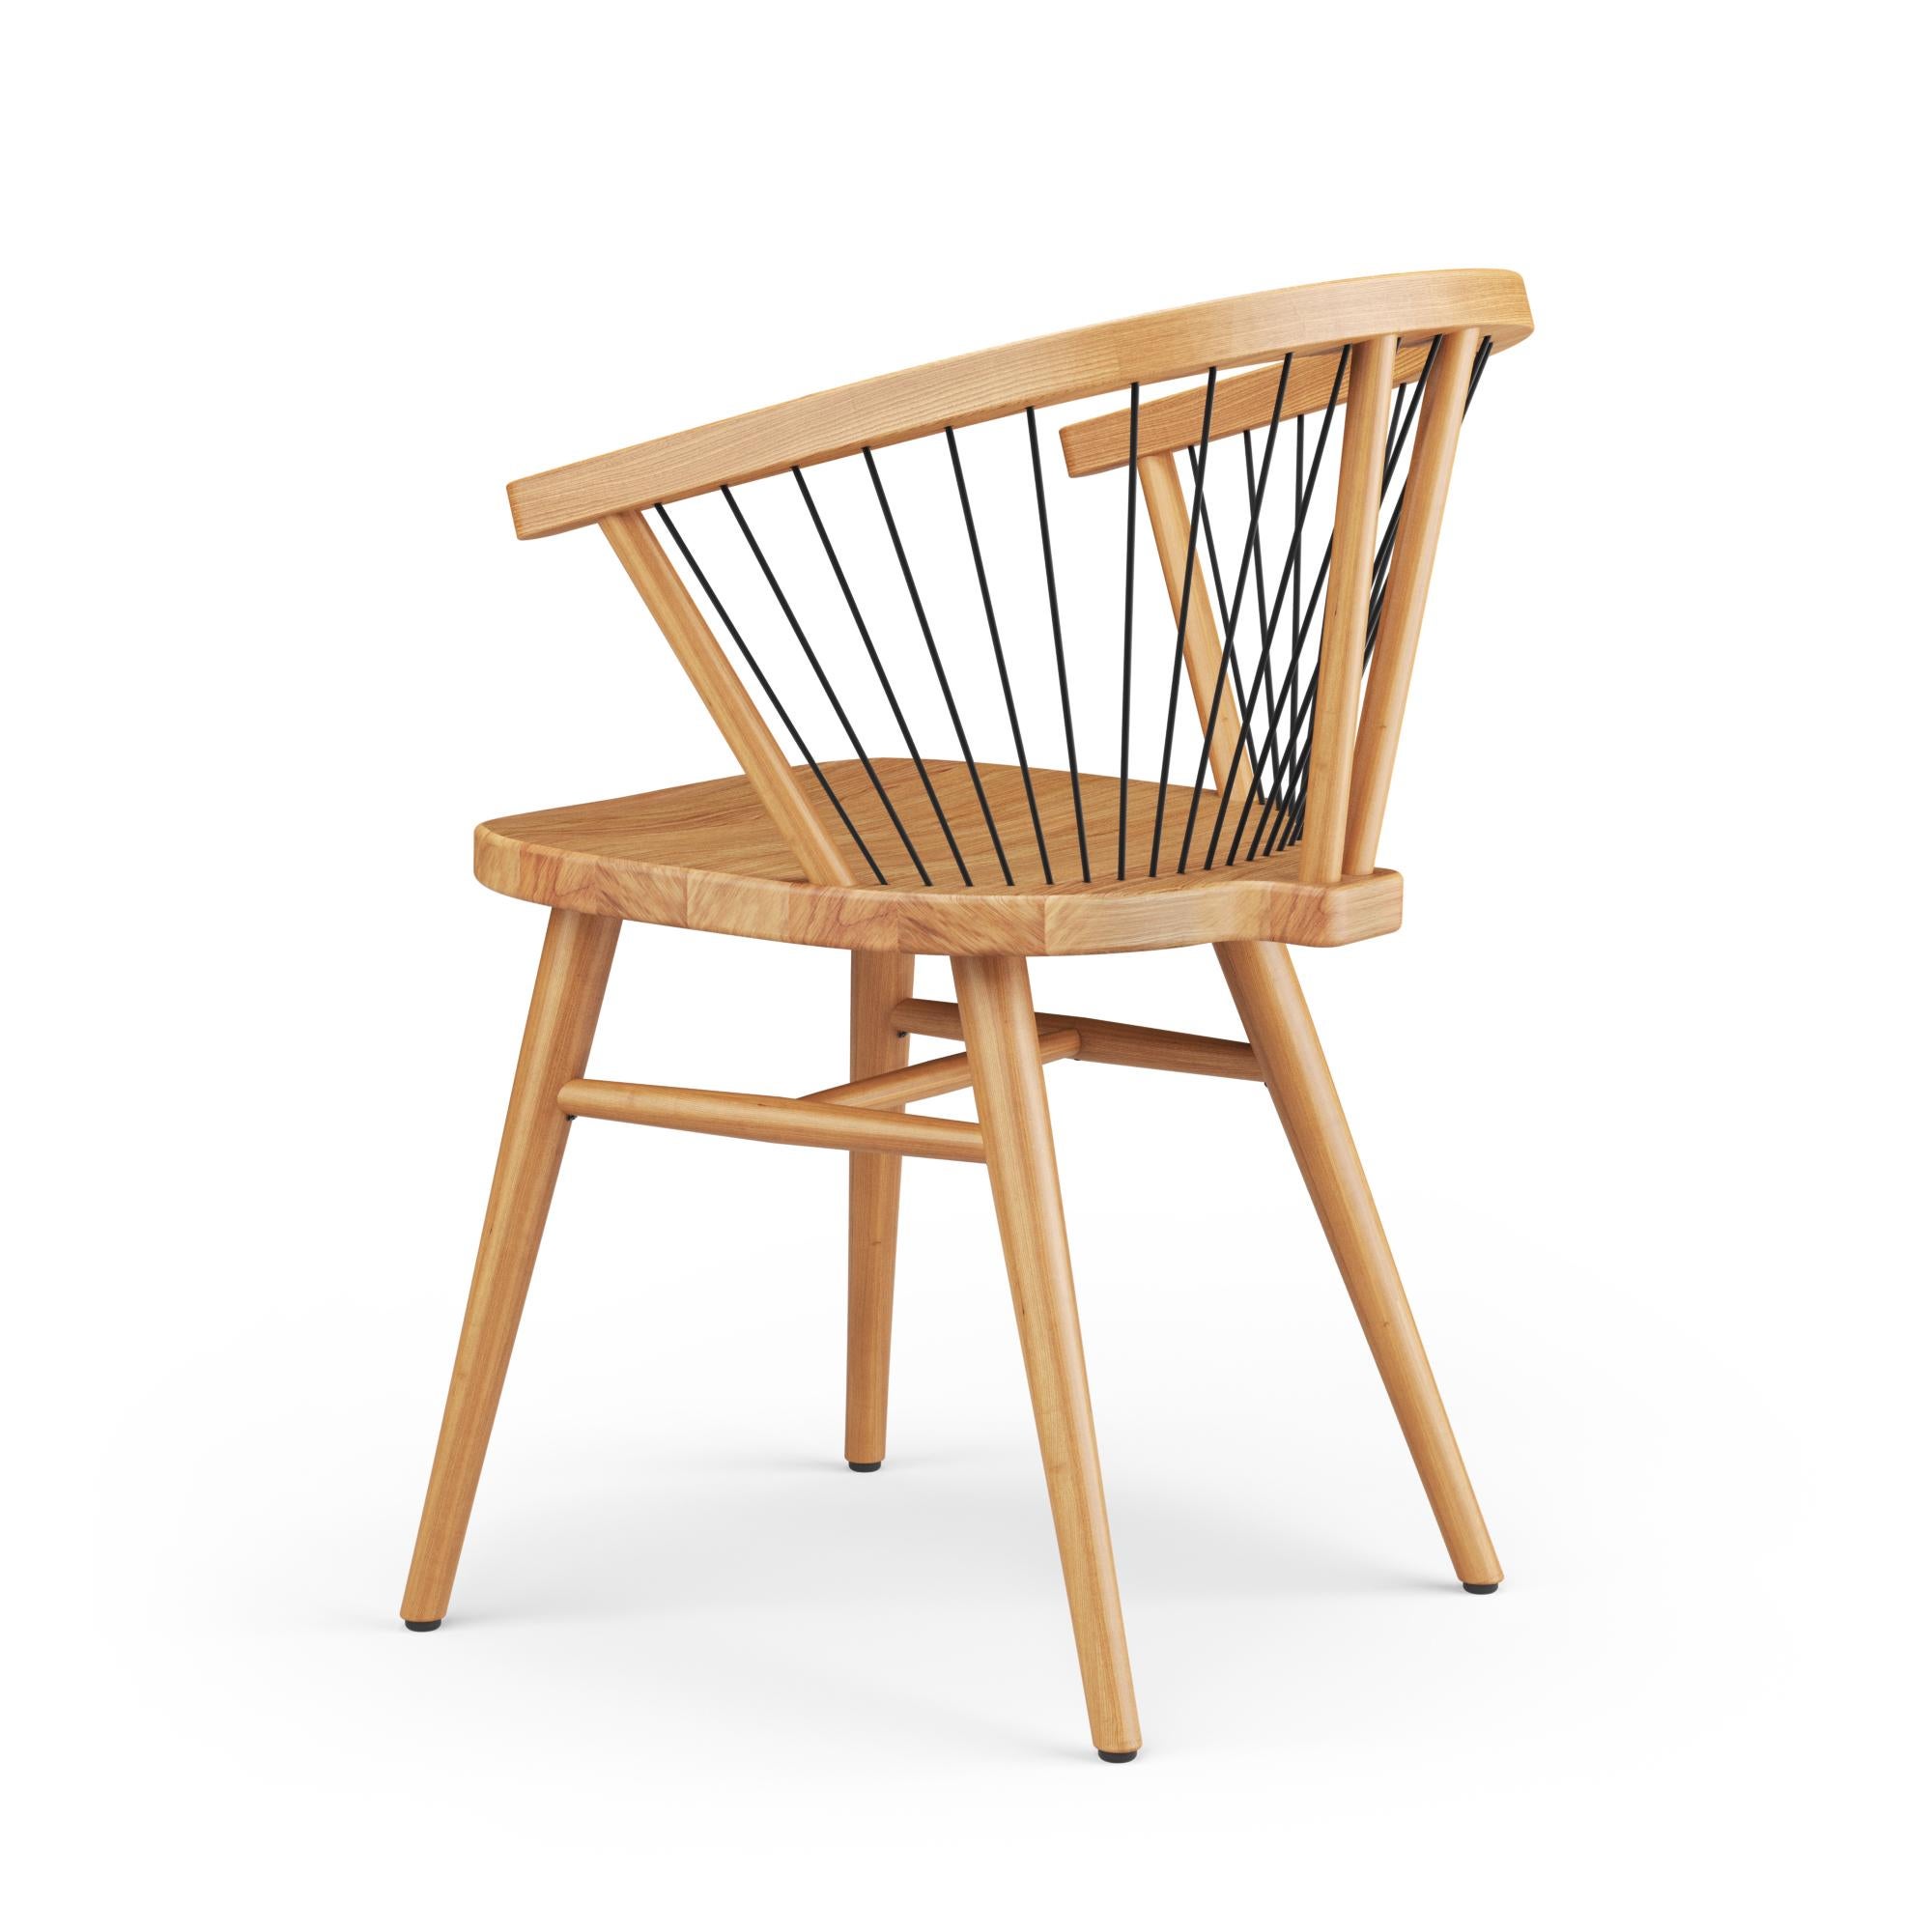 Mexican Hayche Cuerdas Rounded chair, Oak & Black, UK, Made To Order For Sale